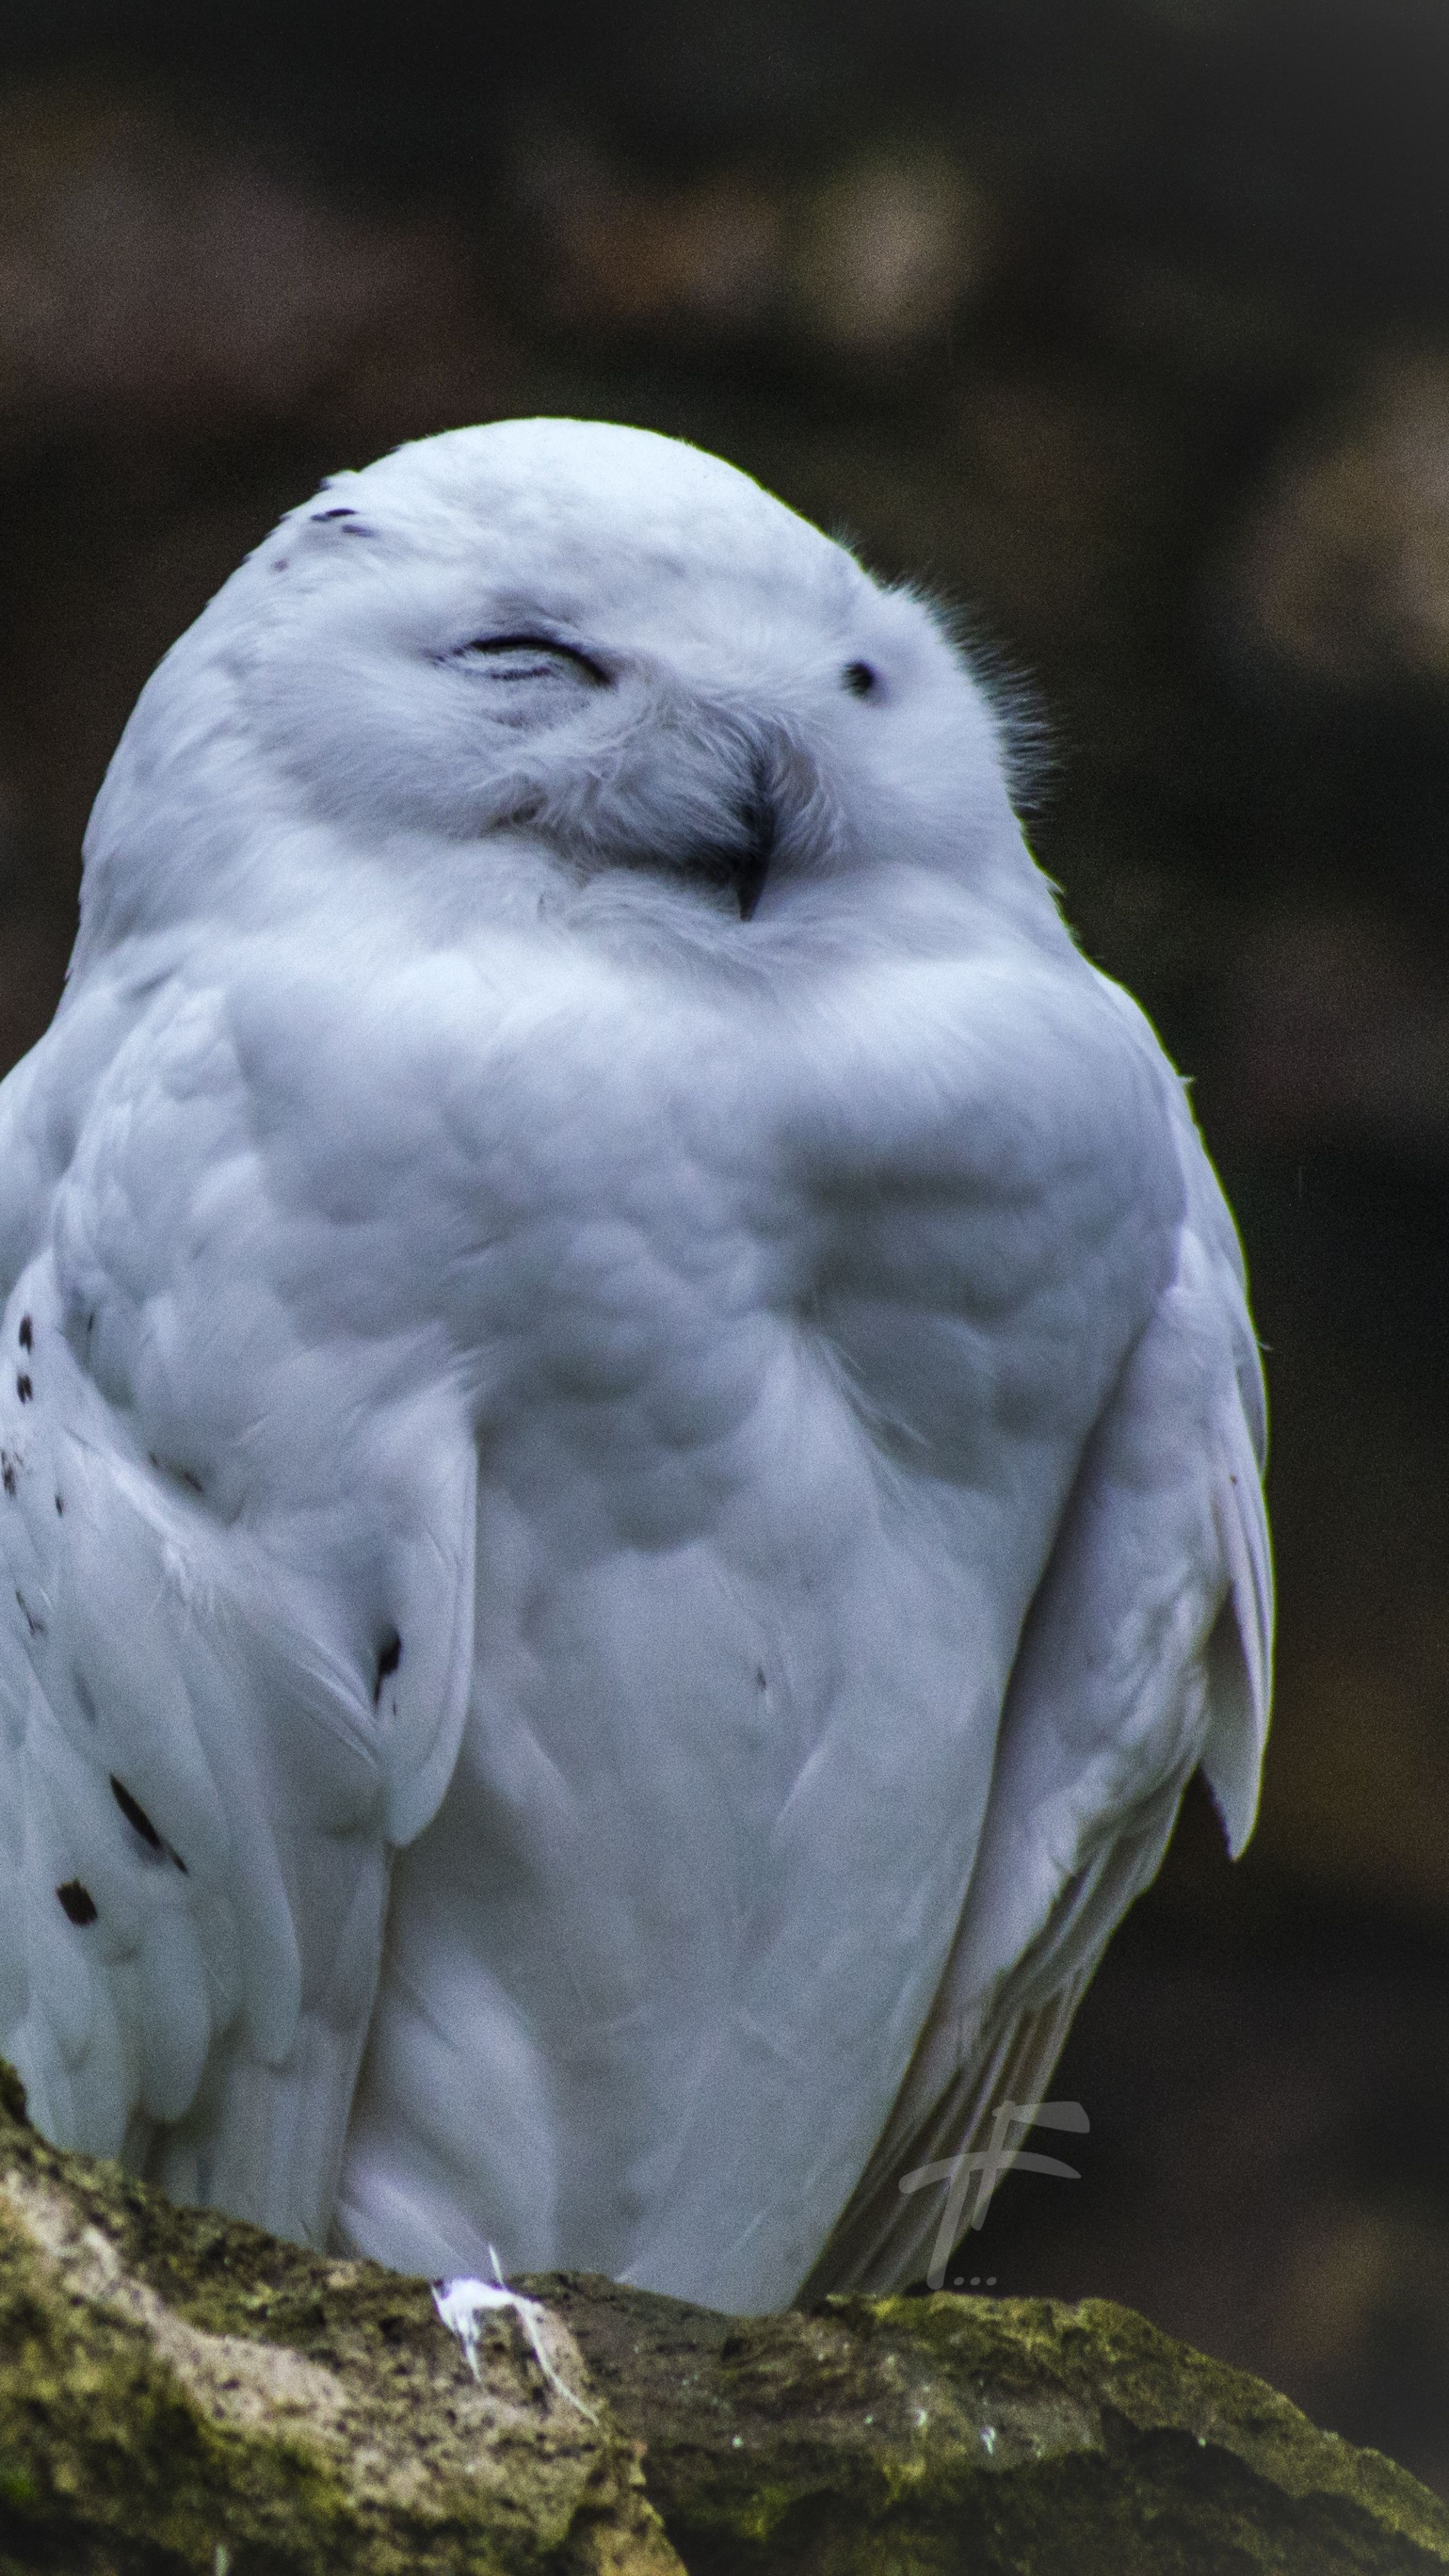 Hedwig: Used for delivering messages throughout the Harry Potter series. 2160x3840 4K Background.